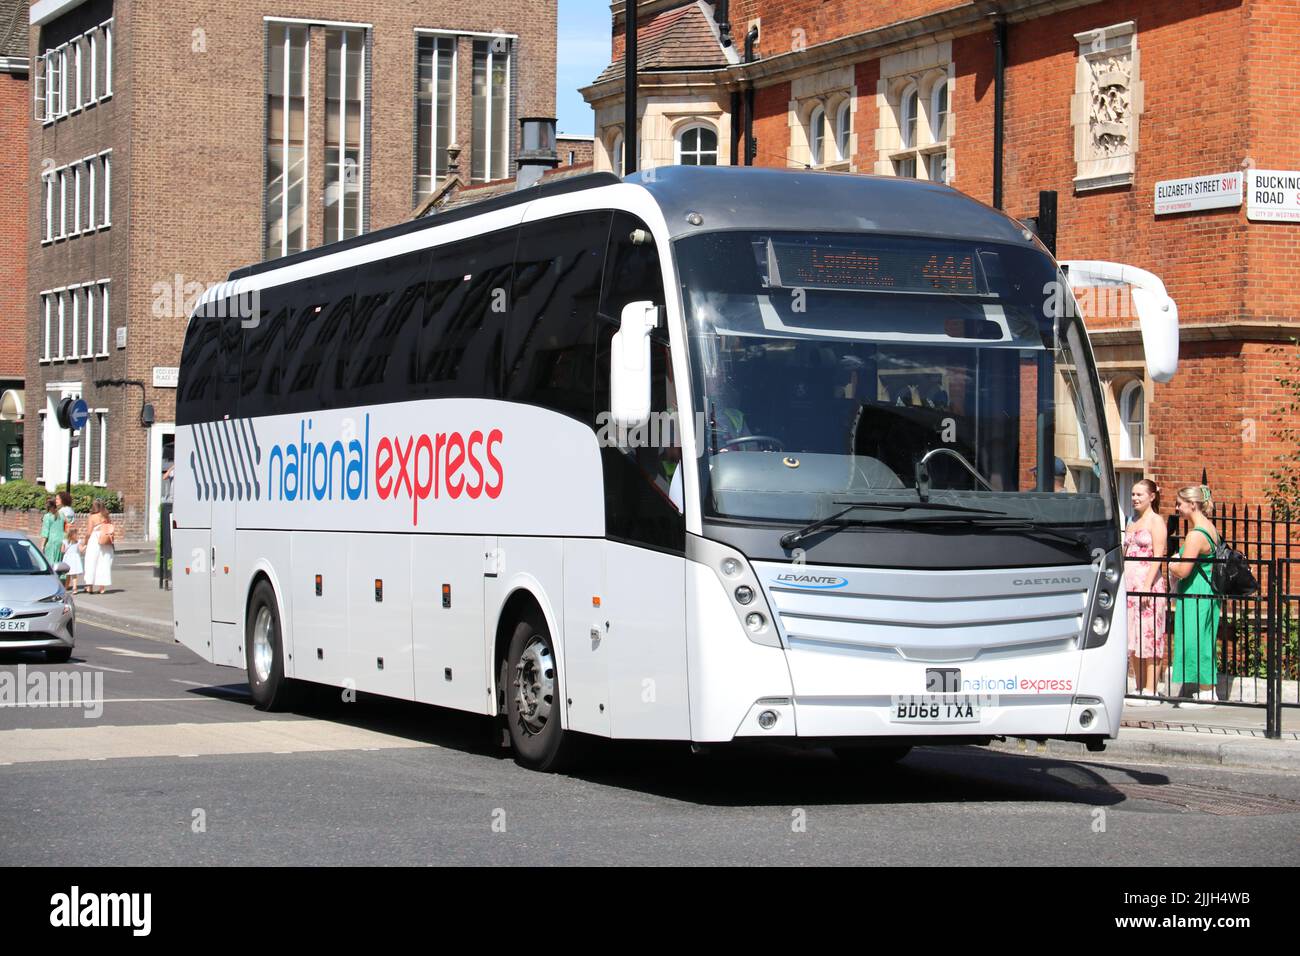 NATIONAL EXPRESS COACH IN LONDON Stock Photo